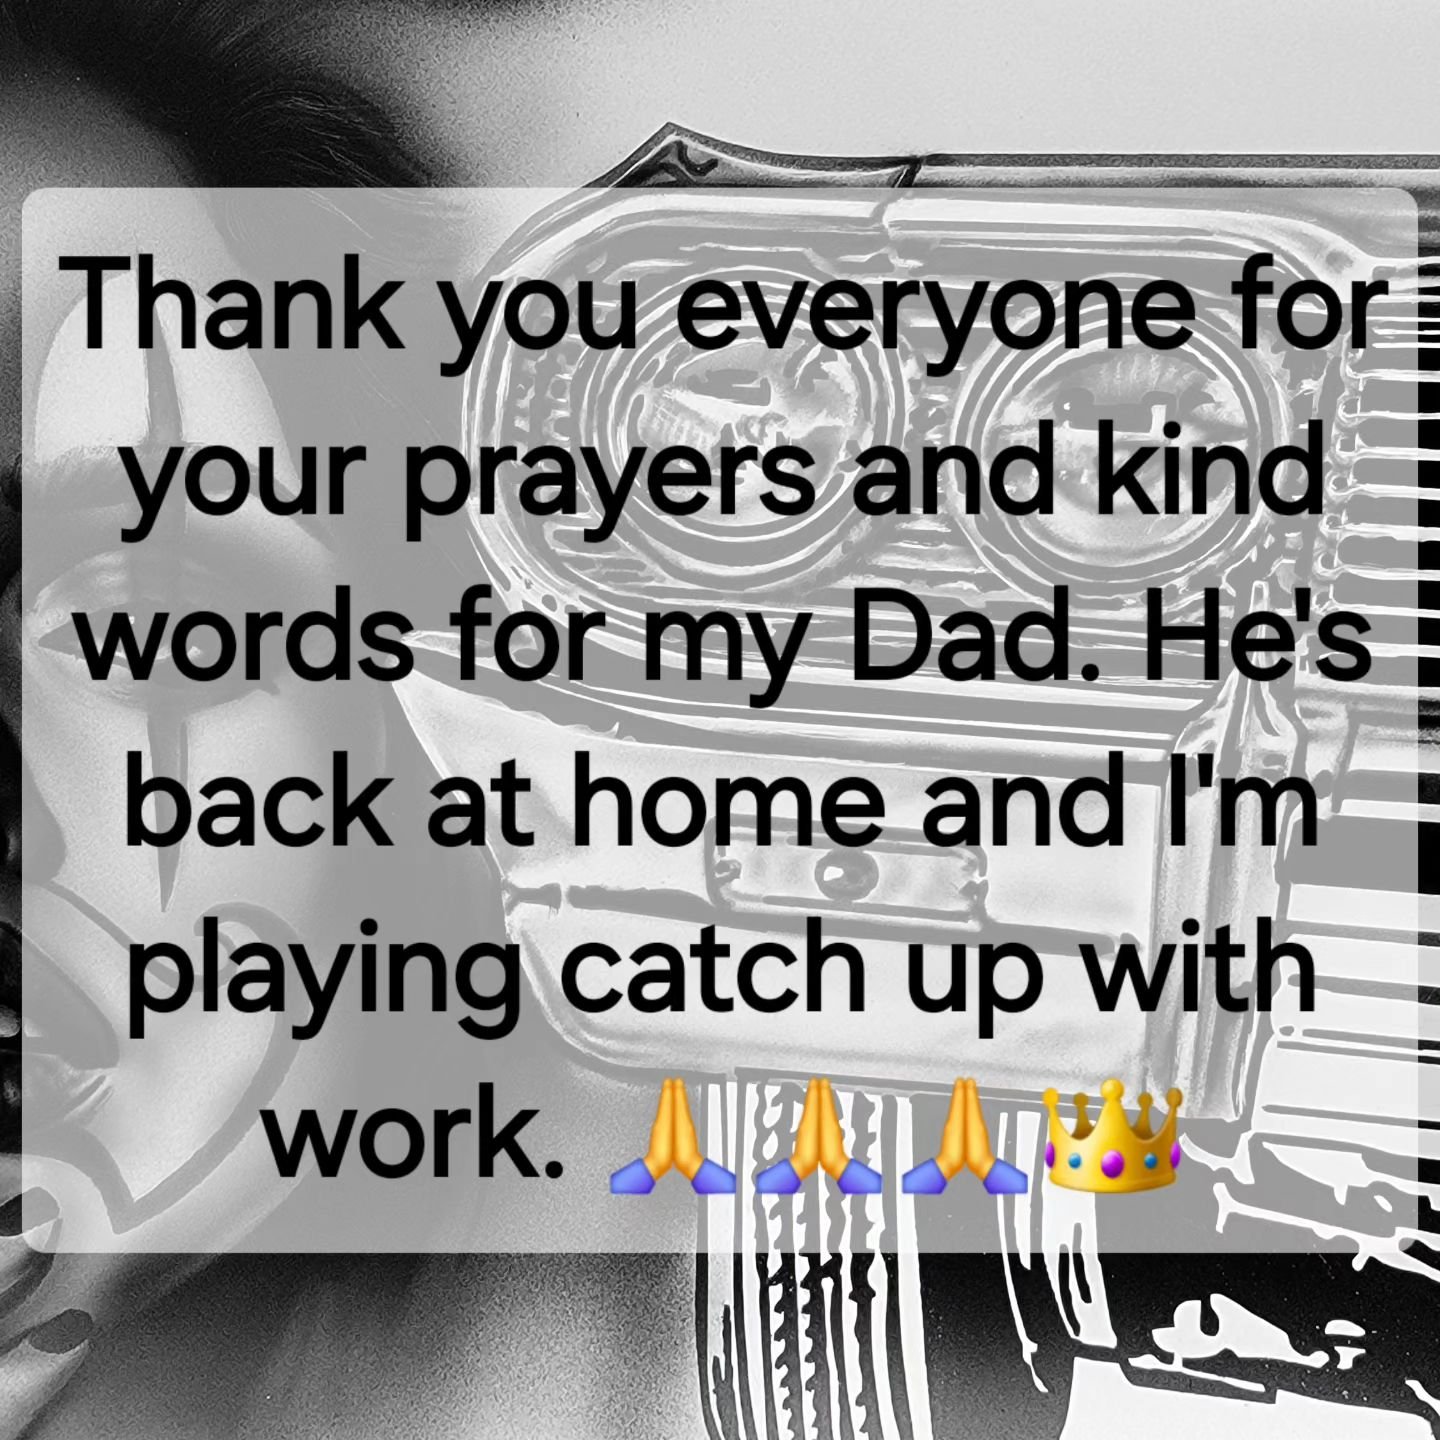 Thank you everyone for praying for me and my family and taking the time to leave messages. We appreciate it and my Dad is ok and back at home and we're back to the Hustle. Appreciate you all. God bless ✝️ 🙏